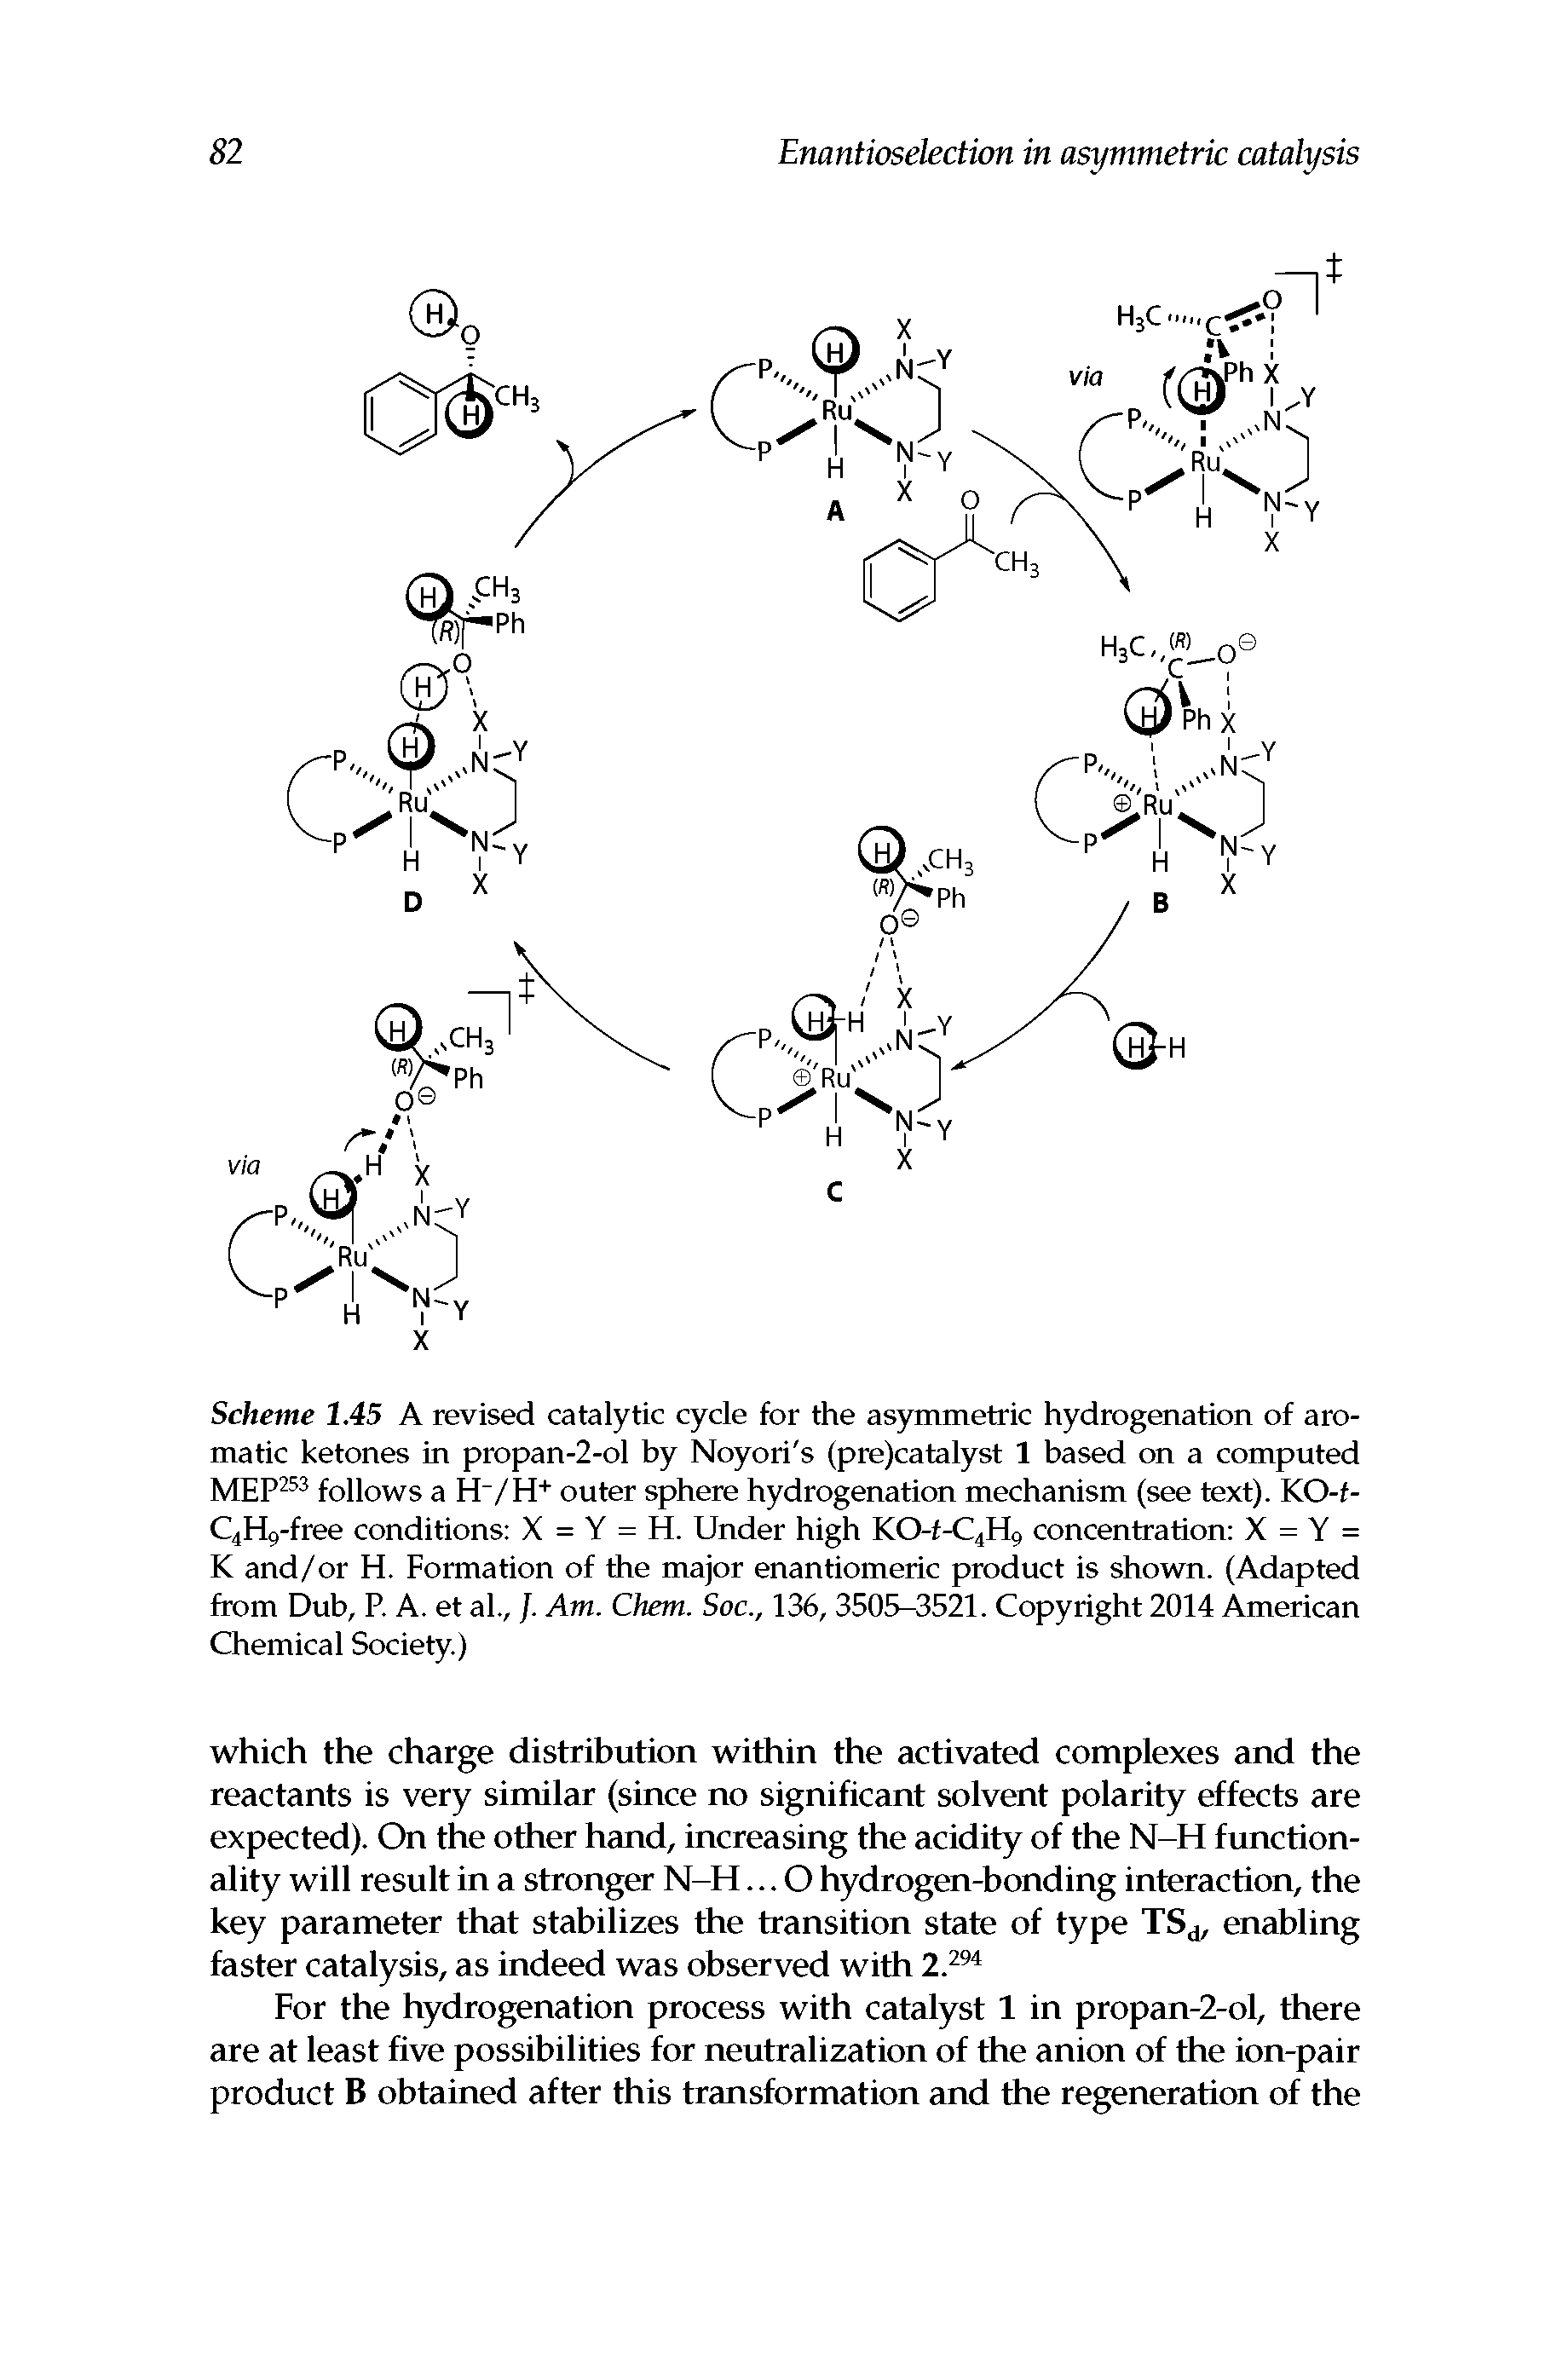 Scheme 1.45 A revised catalytic cycle for the asymmetric hydrogenation of aromatic ketones in propan-2-ol by Noyori s (pre)catalyst 1 based on a computed MEp253 follows a H /H" " outer sphere hydrogenation mechanism (see text). KO-f-C4H9 free conditions X = Y = H. Under high KO-f-C4H9 concentration X = Y = K and/or H. Formation of the major enantiomeric product is shown. (Adapted from Dub, P. A. et al., /. Am. Chem. Soc., 136, 3505-3521. Copyright 2014 American Chemical Society.)...